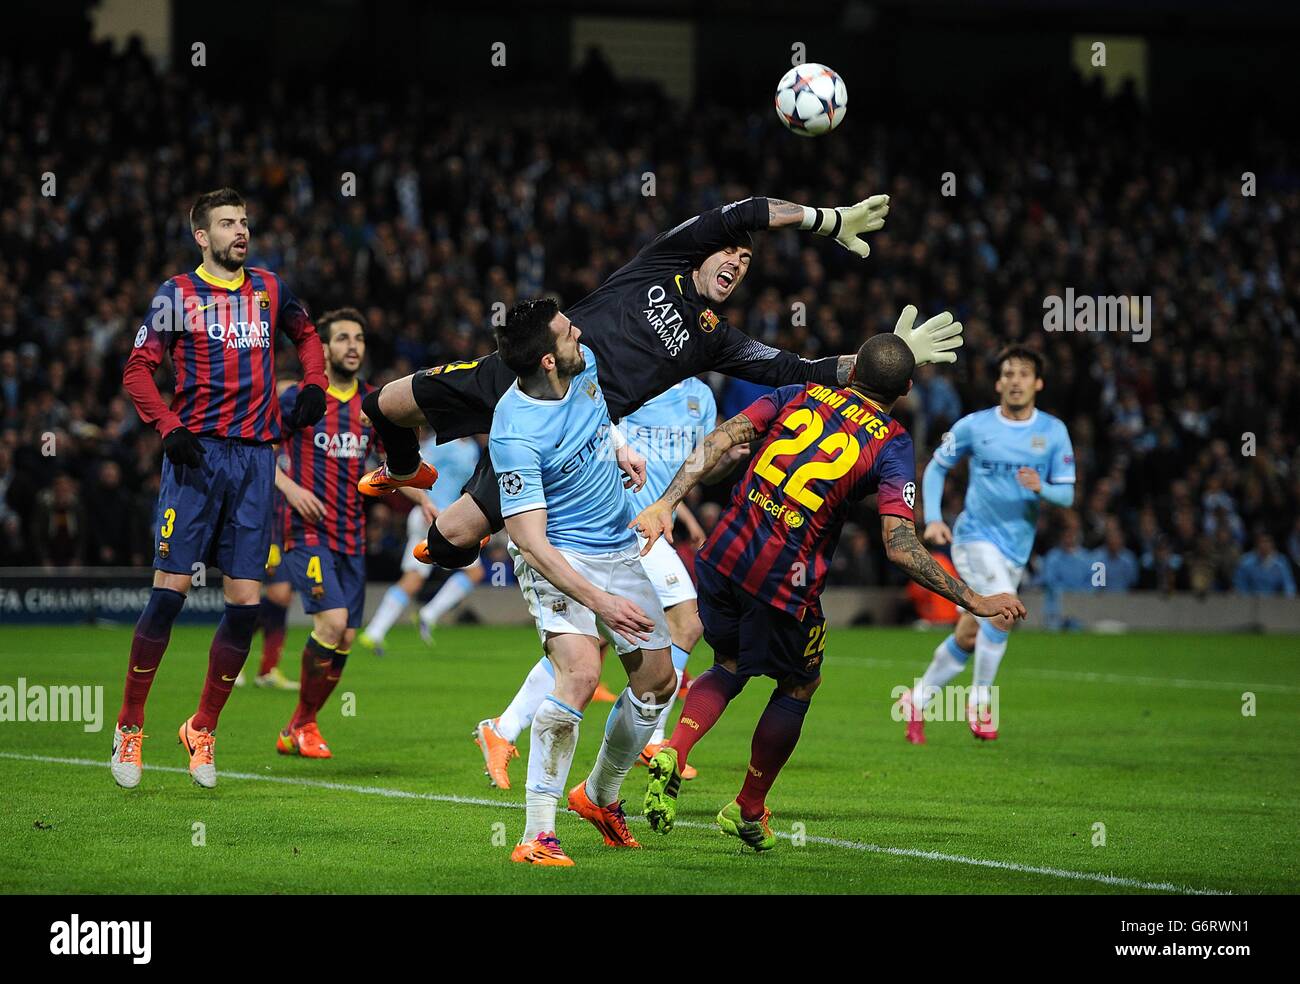 Soccer - UEFA Champions League - Round of 16 - Manchester City v Barcelona - Etihad Stadium. Barcelona's goalkeeper Victor Valdes struggles to claim the ball in a crowded area Stock Photo